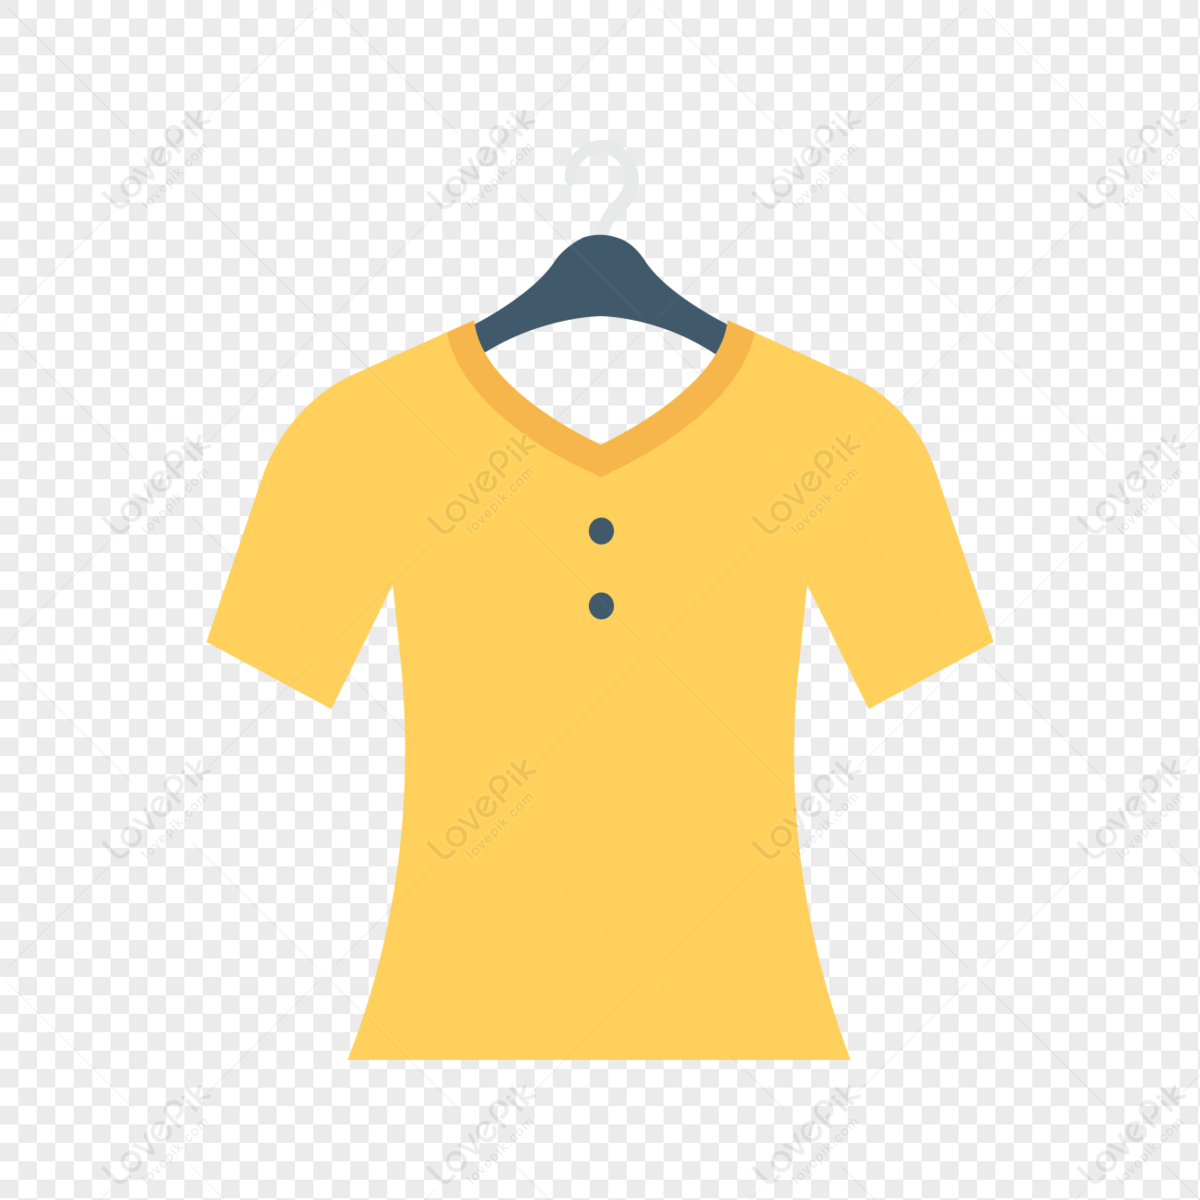 Short Sleeve Dress Icon Free Vector Illustration Material PNG ...